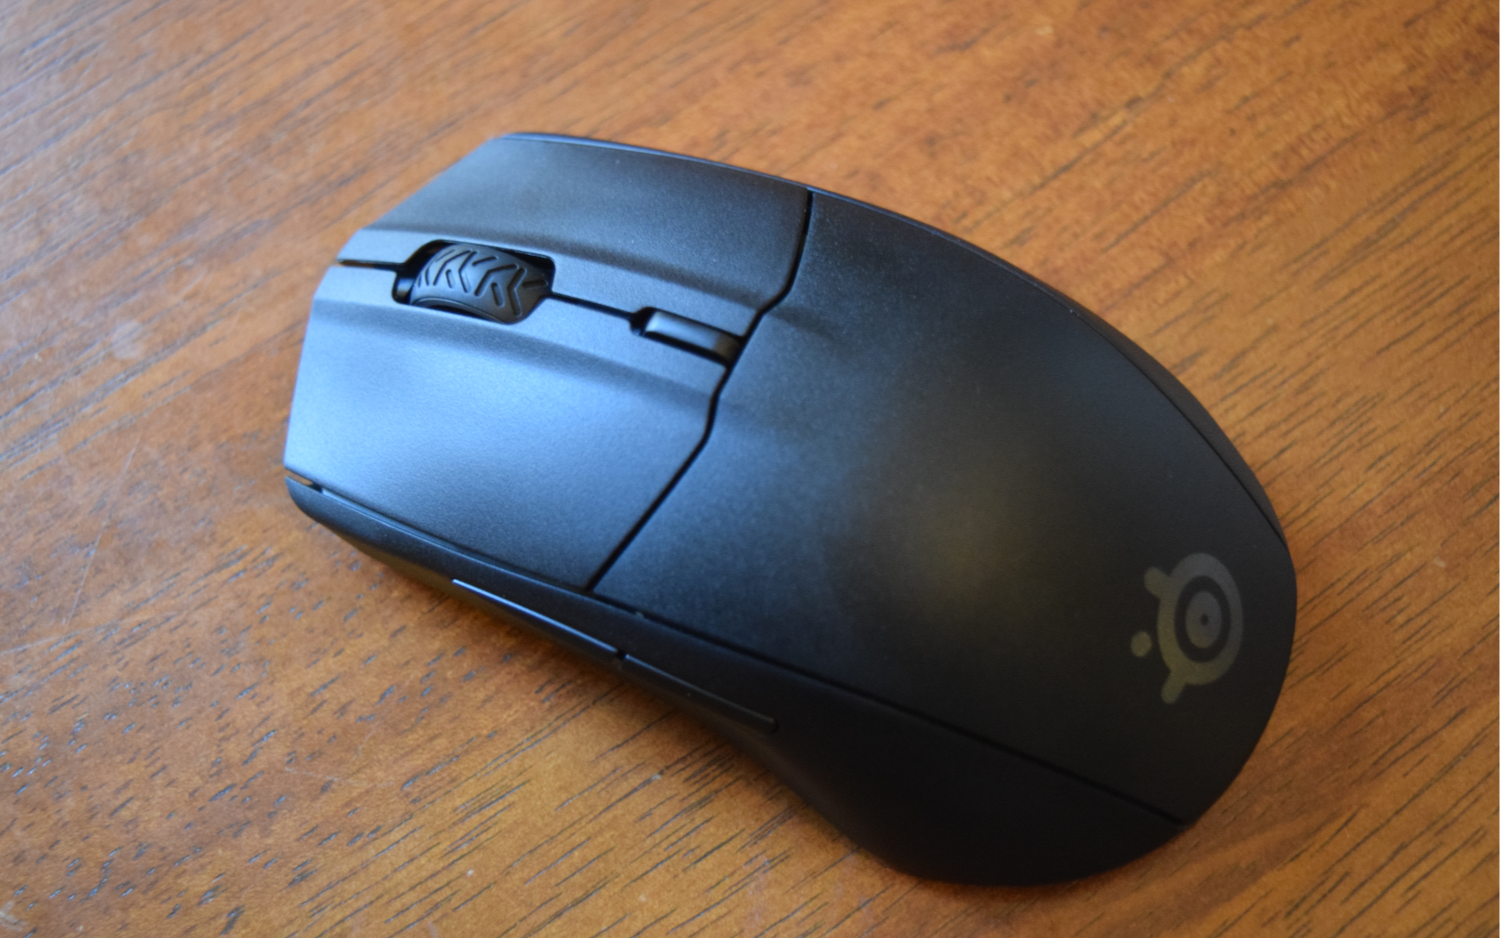 SteelSeries Rival 3 Wireless: The new wireless queen in test